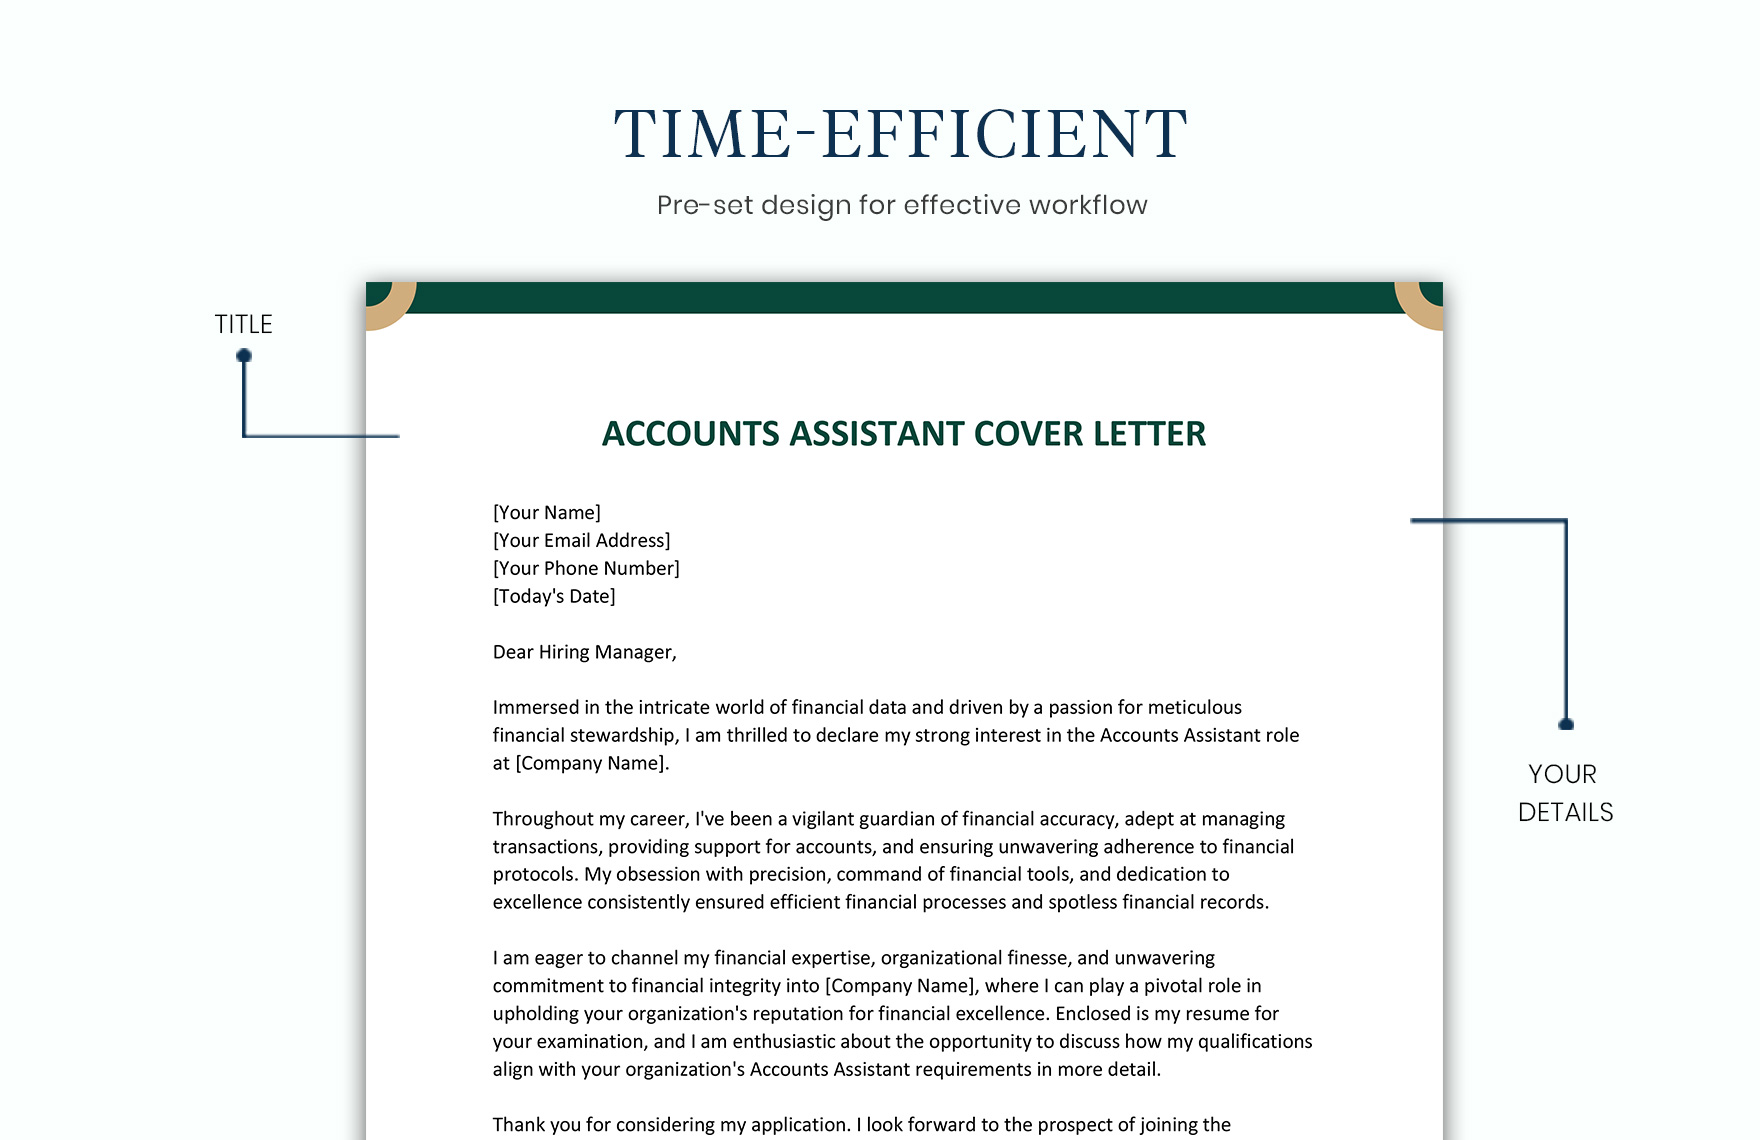 Accounts Assistant Cover Letter